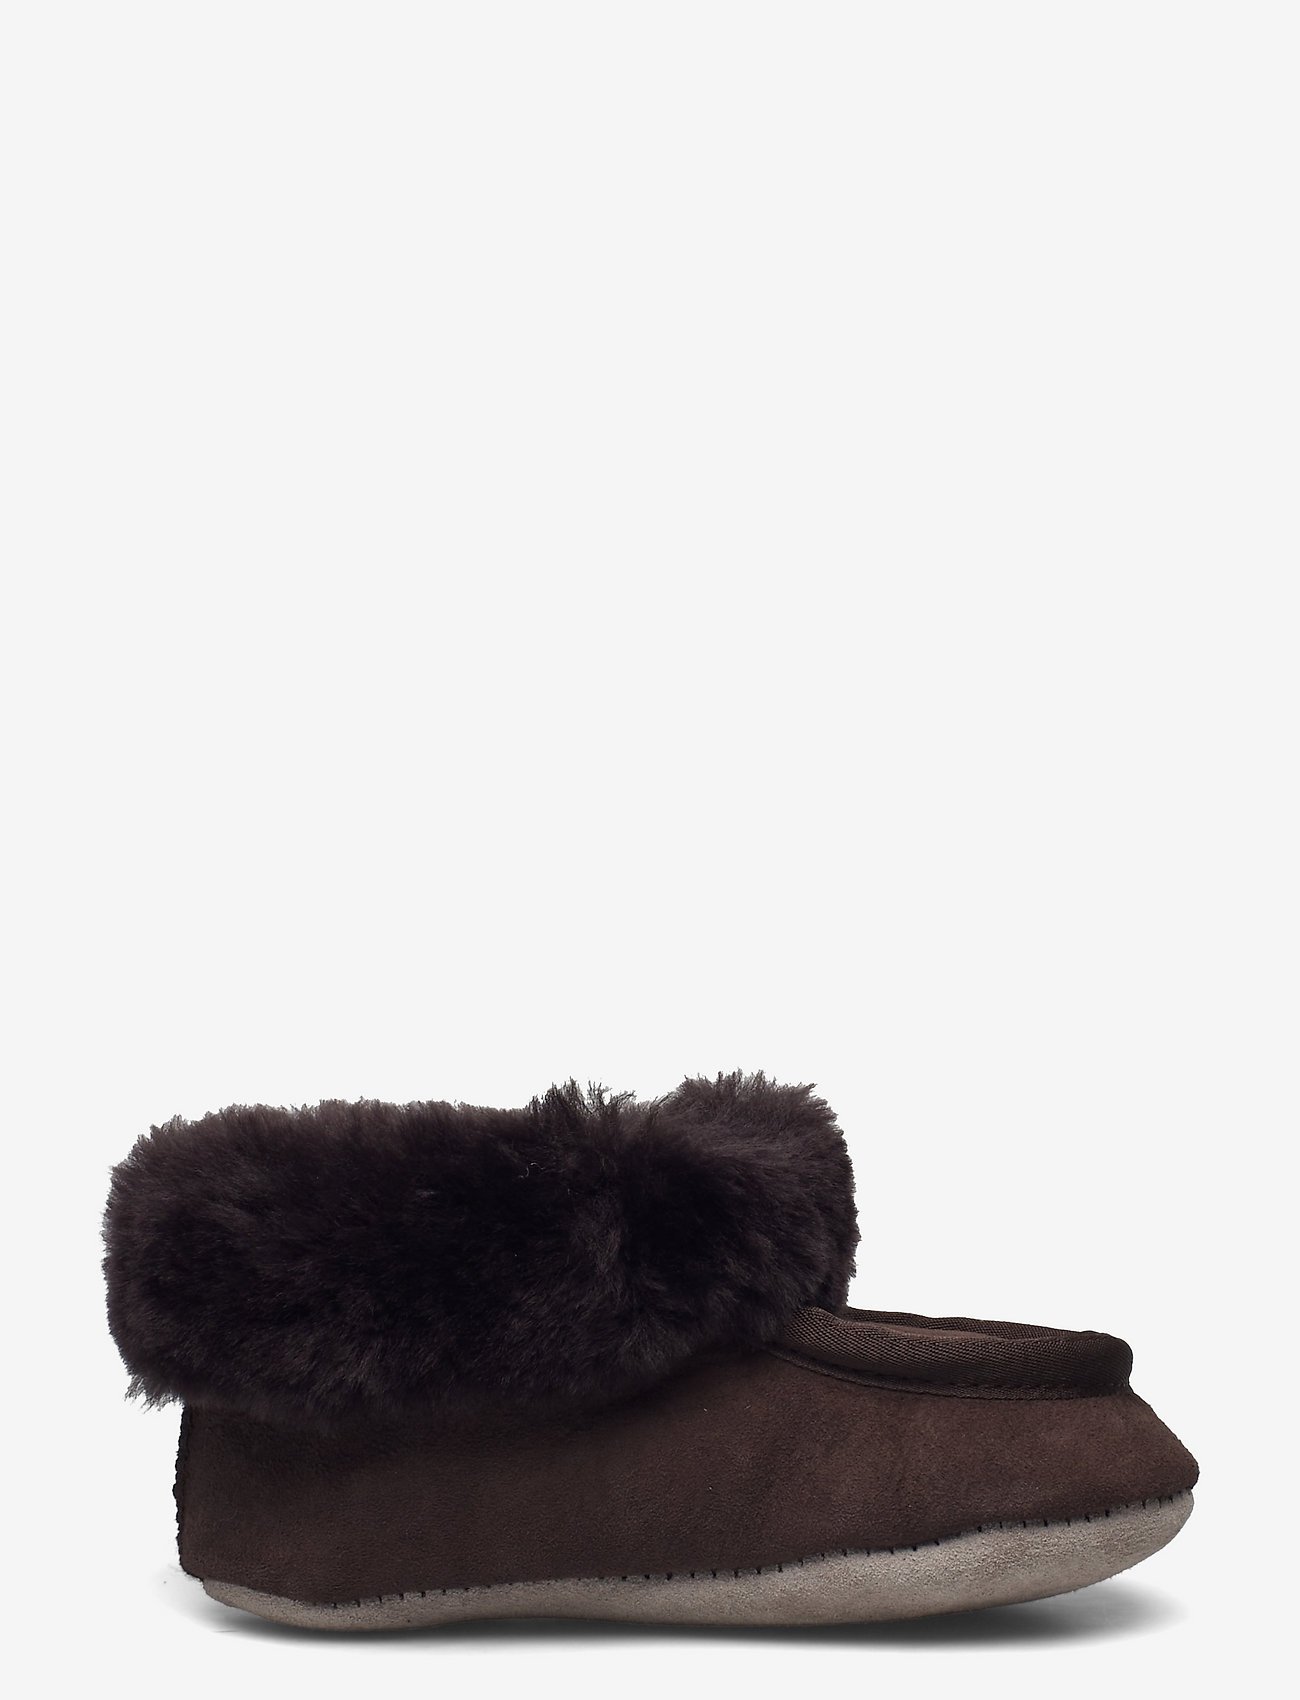 Little B - Slippers - birthday gifts - coffee brown - 1